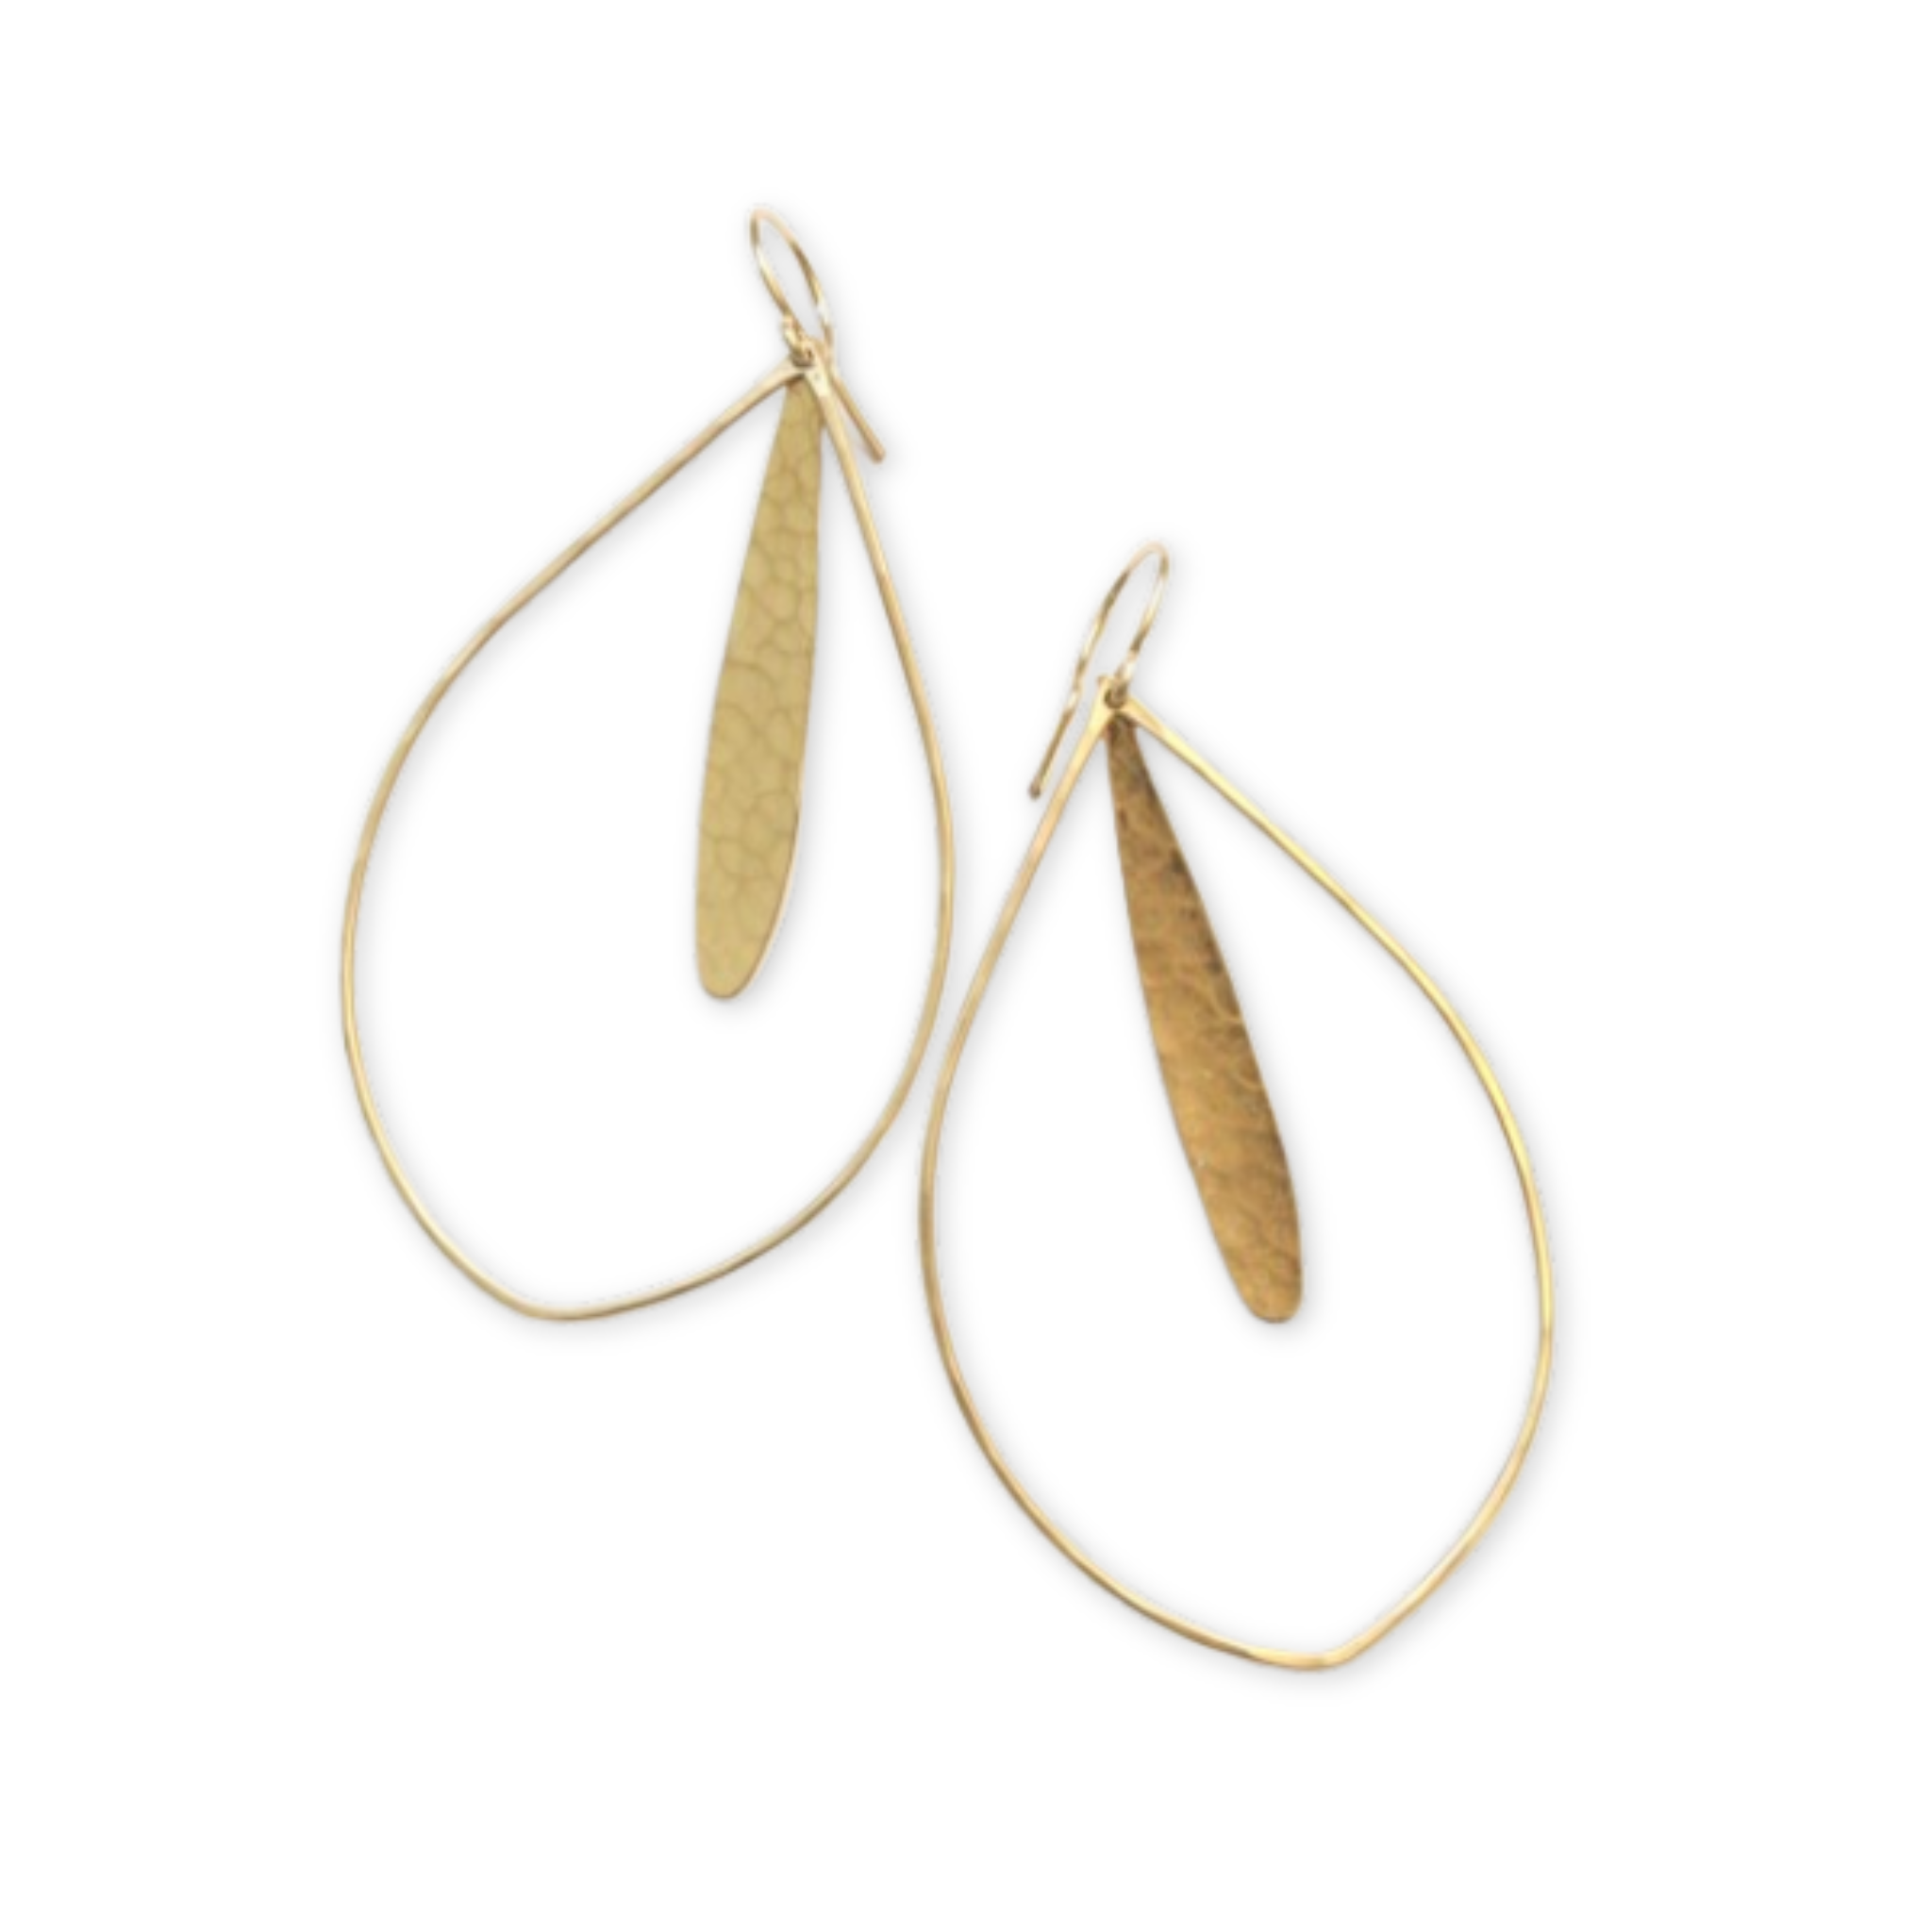 teardrop shaped earrings with a long hammered dangling pendant